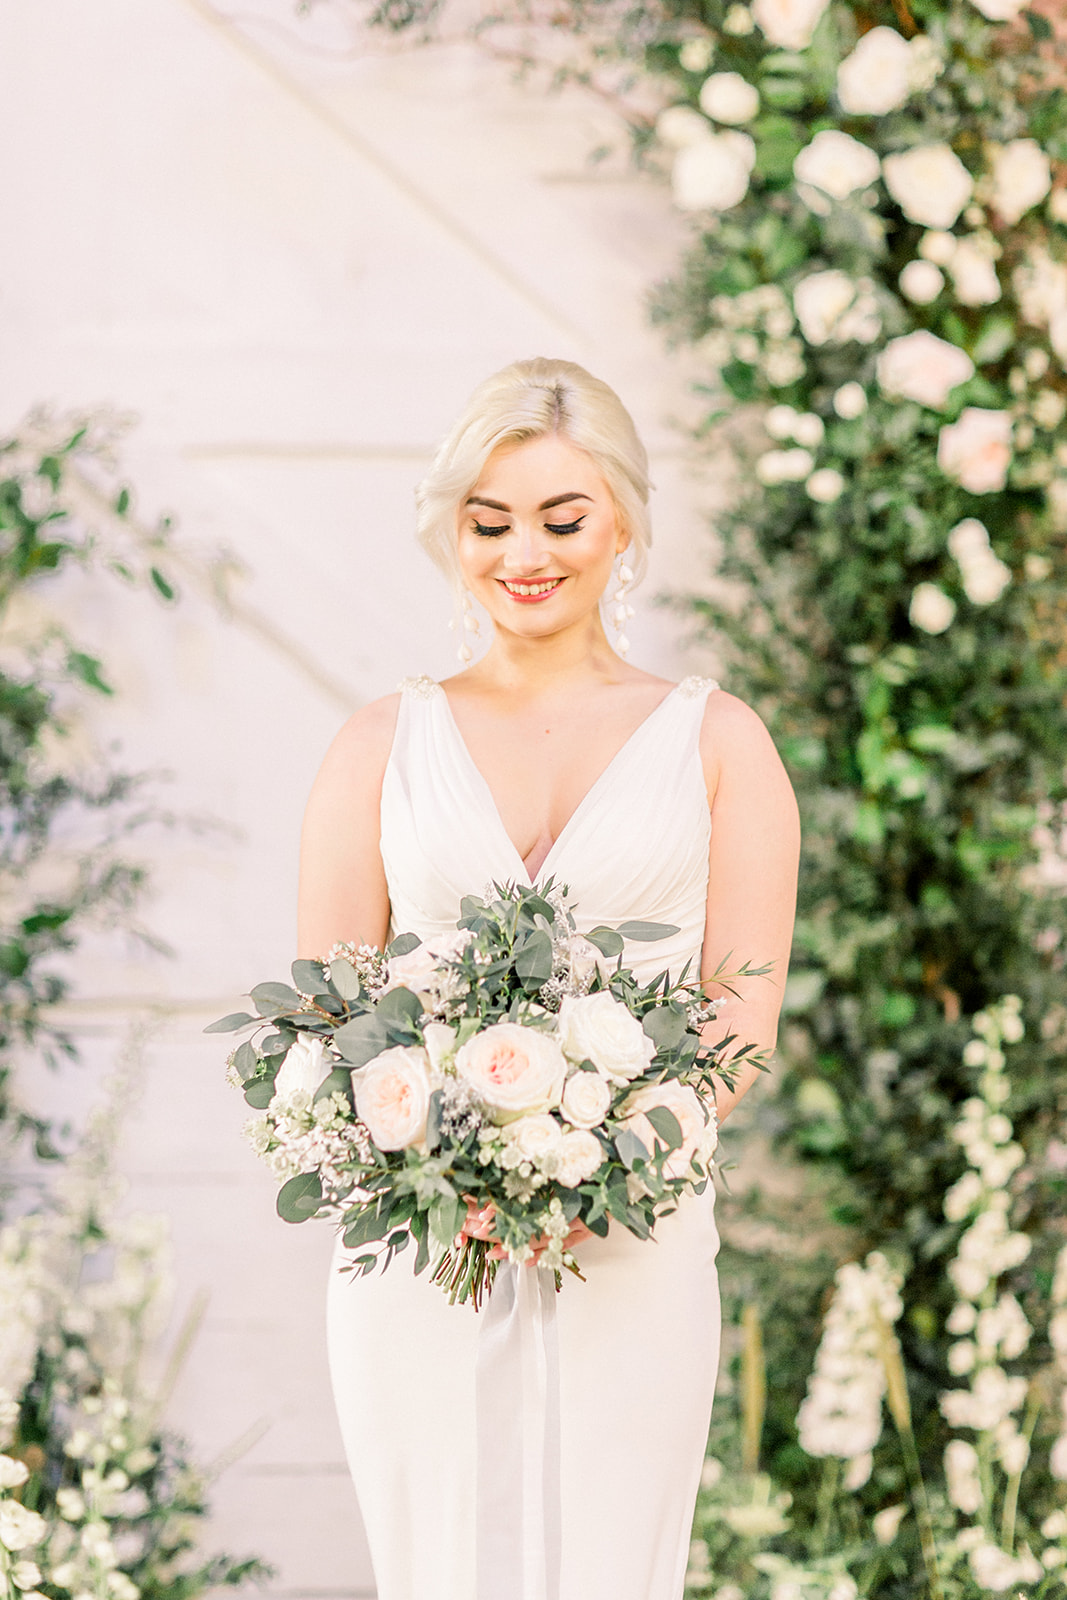 Floral arch and bridal bouquet by Petal and Wild at The Railway Barn.jpg